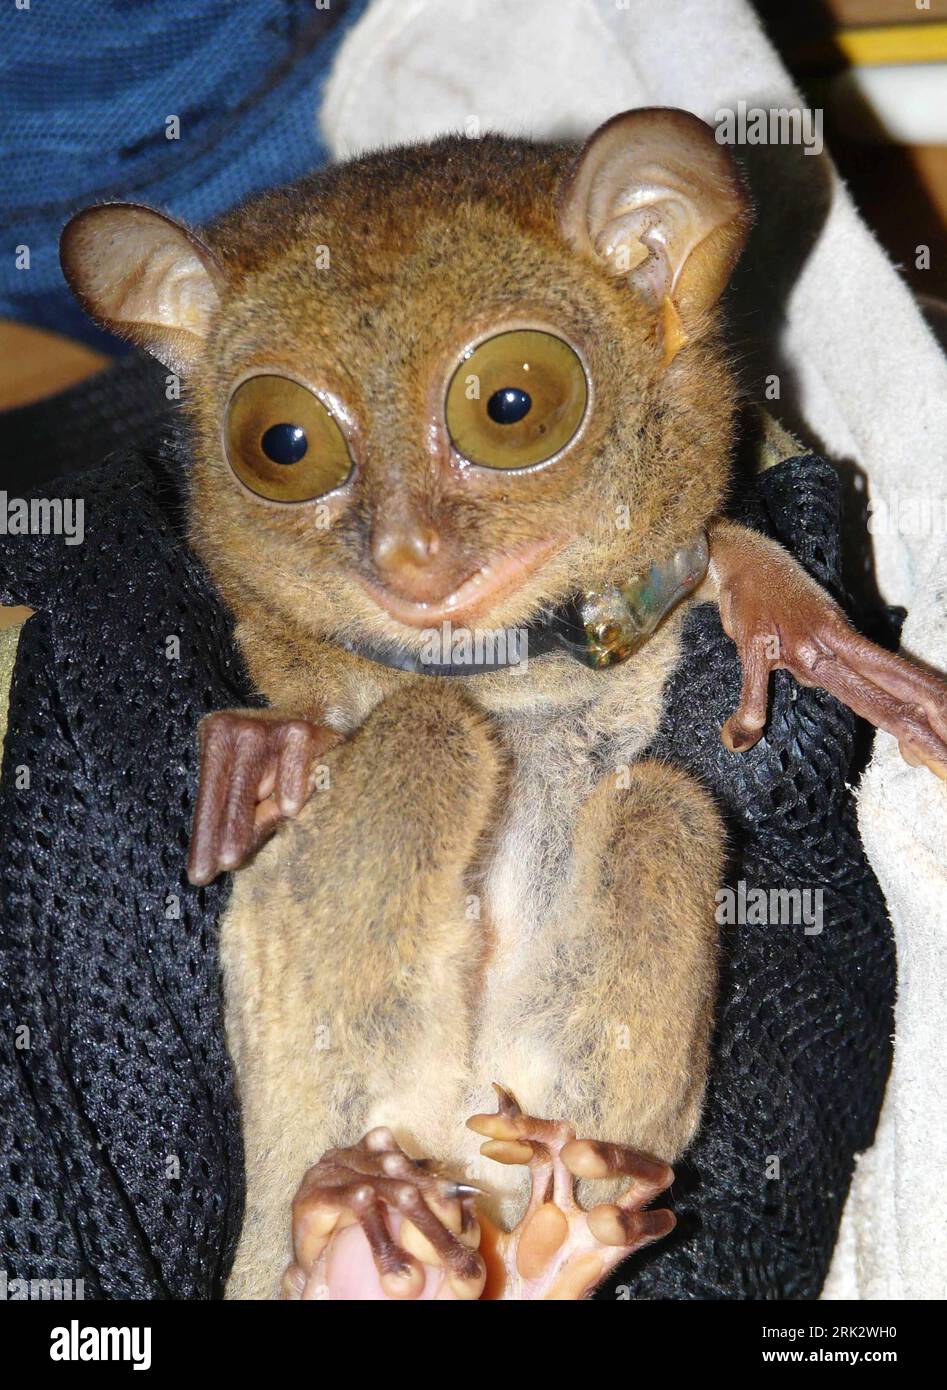 Bildnummer: 53256037  Datum: 08.08.2009  Copyright: imago/Xinhua (090811) -- KINABATANGAN, Aug. 11, 2009 (Xinhua) -- A male tarsier is seen at a research center of wild animals in Kinabatangan of Sabah State, east Malaysia, Aug. 8, 2009. Tarsiers, which are 85 to 160 millimeters long and weigh 80 to 165 grams, are one of the smallest and rarest primates in the world. (Xinhua) (gj) (1)MALAYSIA-KINABATANGAN-TARSIER  PUBLICATIONxNOTxINxCHN  premiumd Tiere Tarsier Affe kbdig xdp  2009 hoch  Koboldmaki    Bildnummer 53256037 Date 08 08 2009 Copyright Imago XINHUA  Kinabatangan Aug 11 2009 XINHUA a Stock Photo